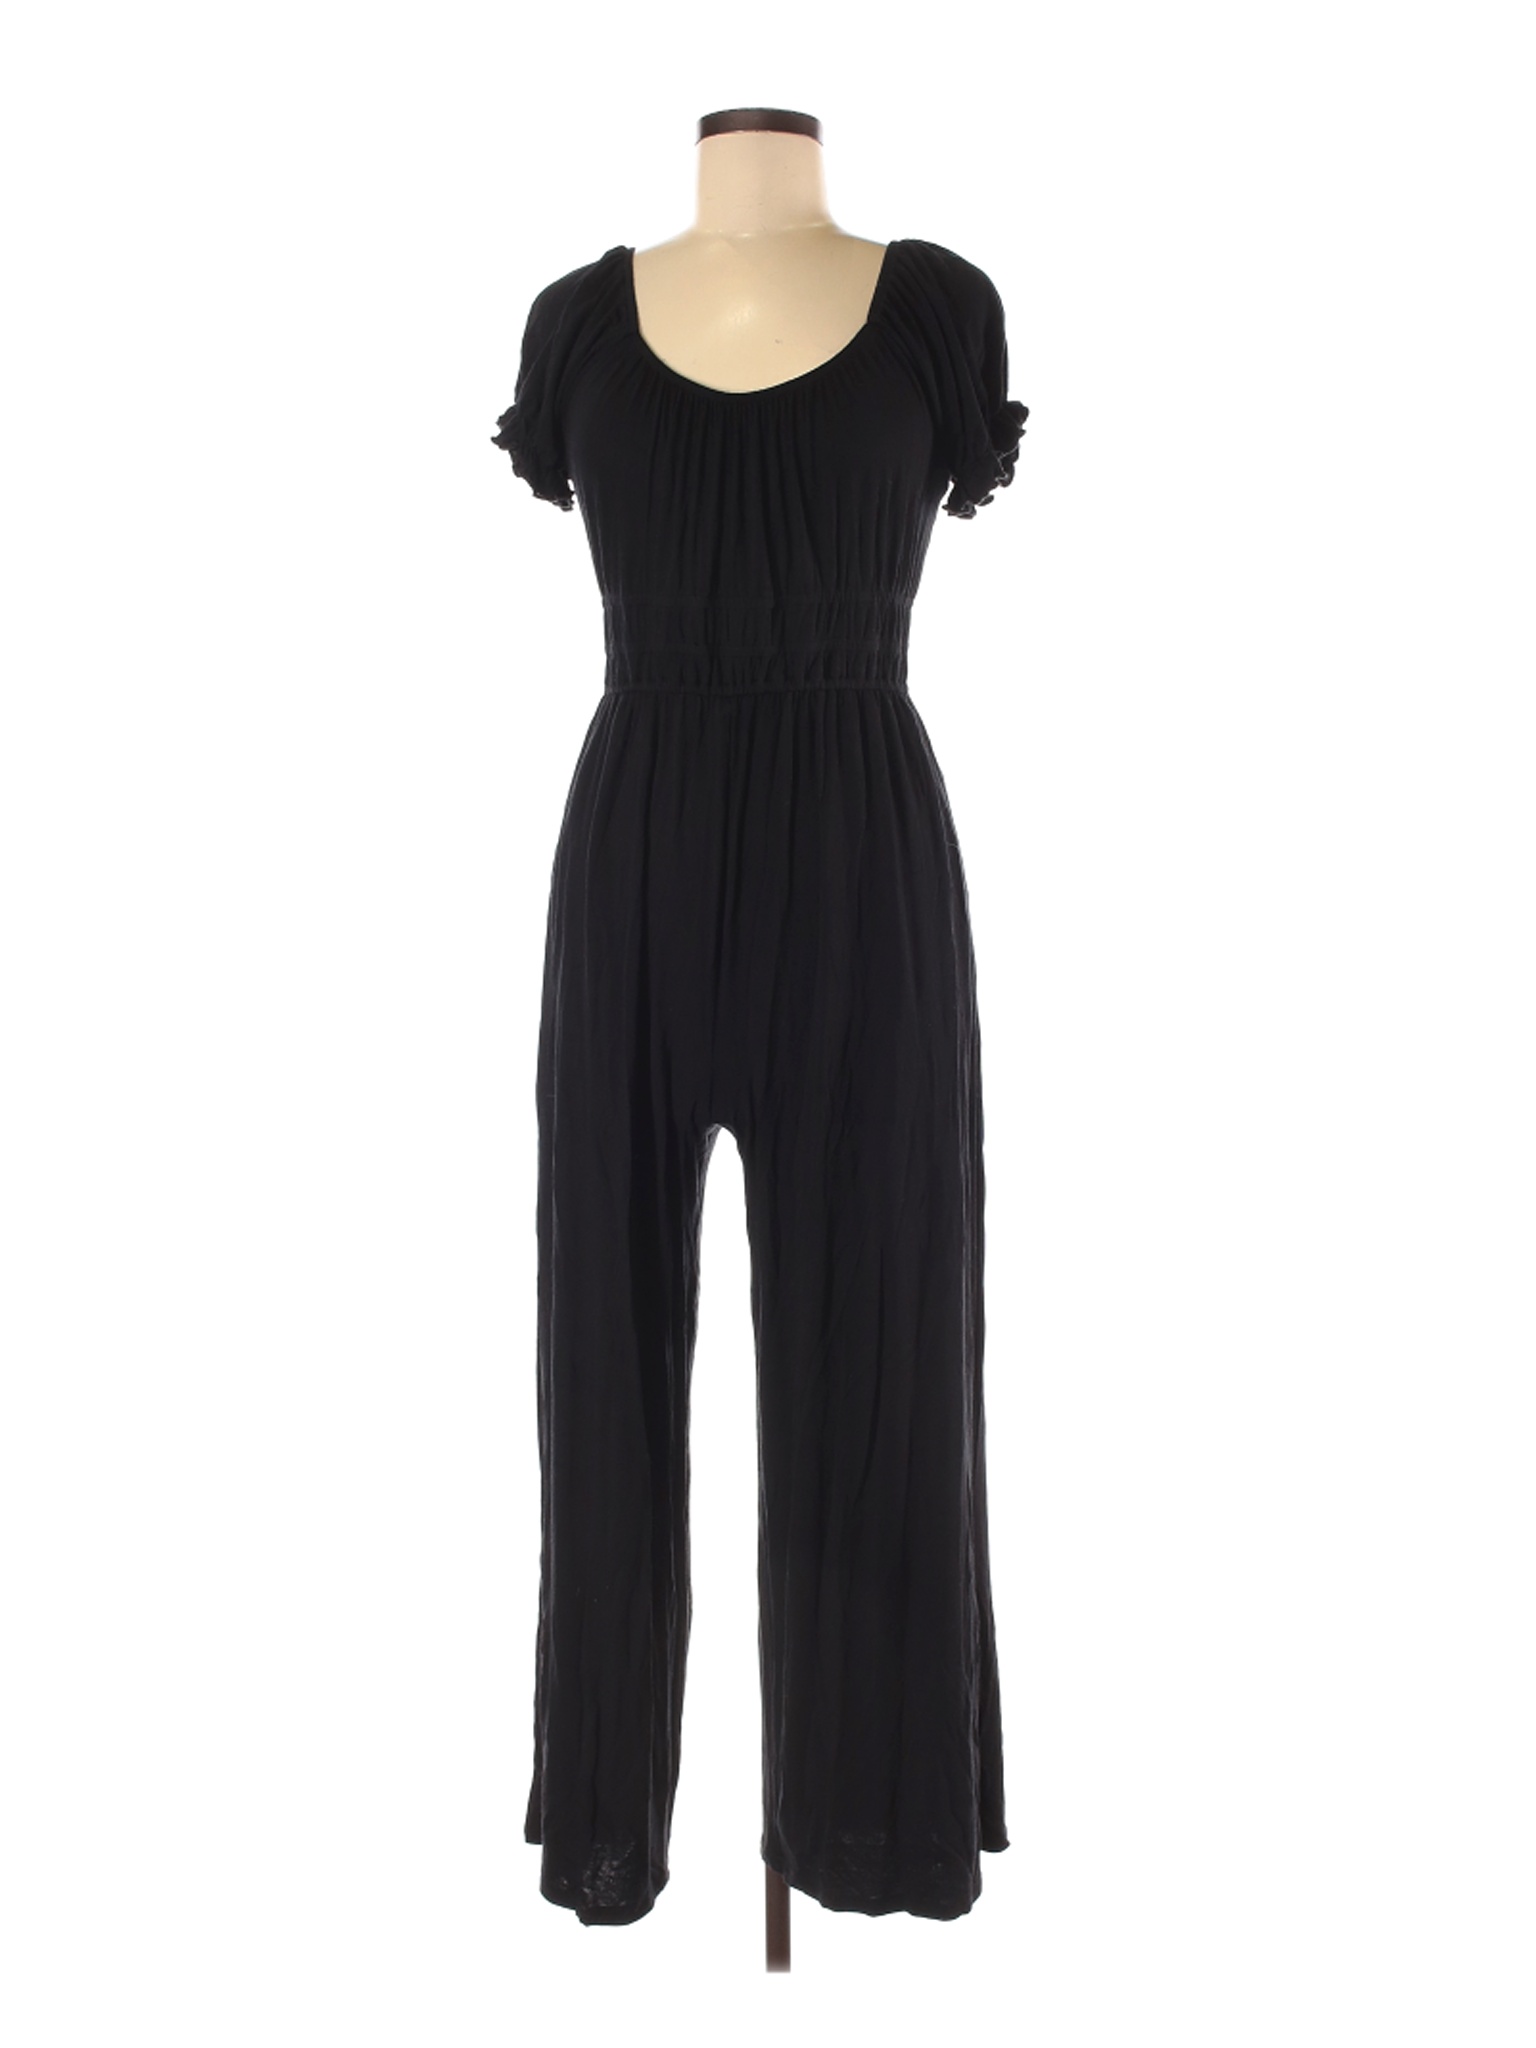 American Eagle Outfitters Women Black Jumpsuit M | eBay